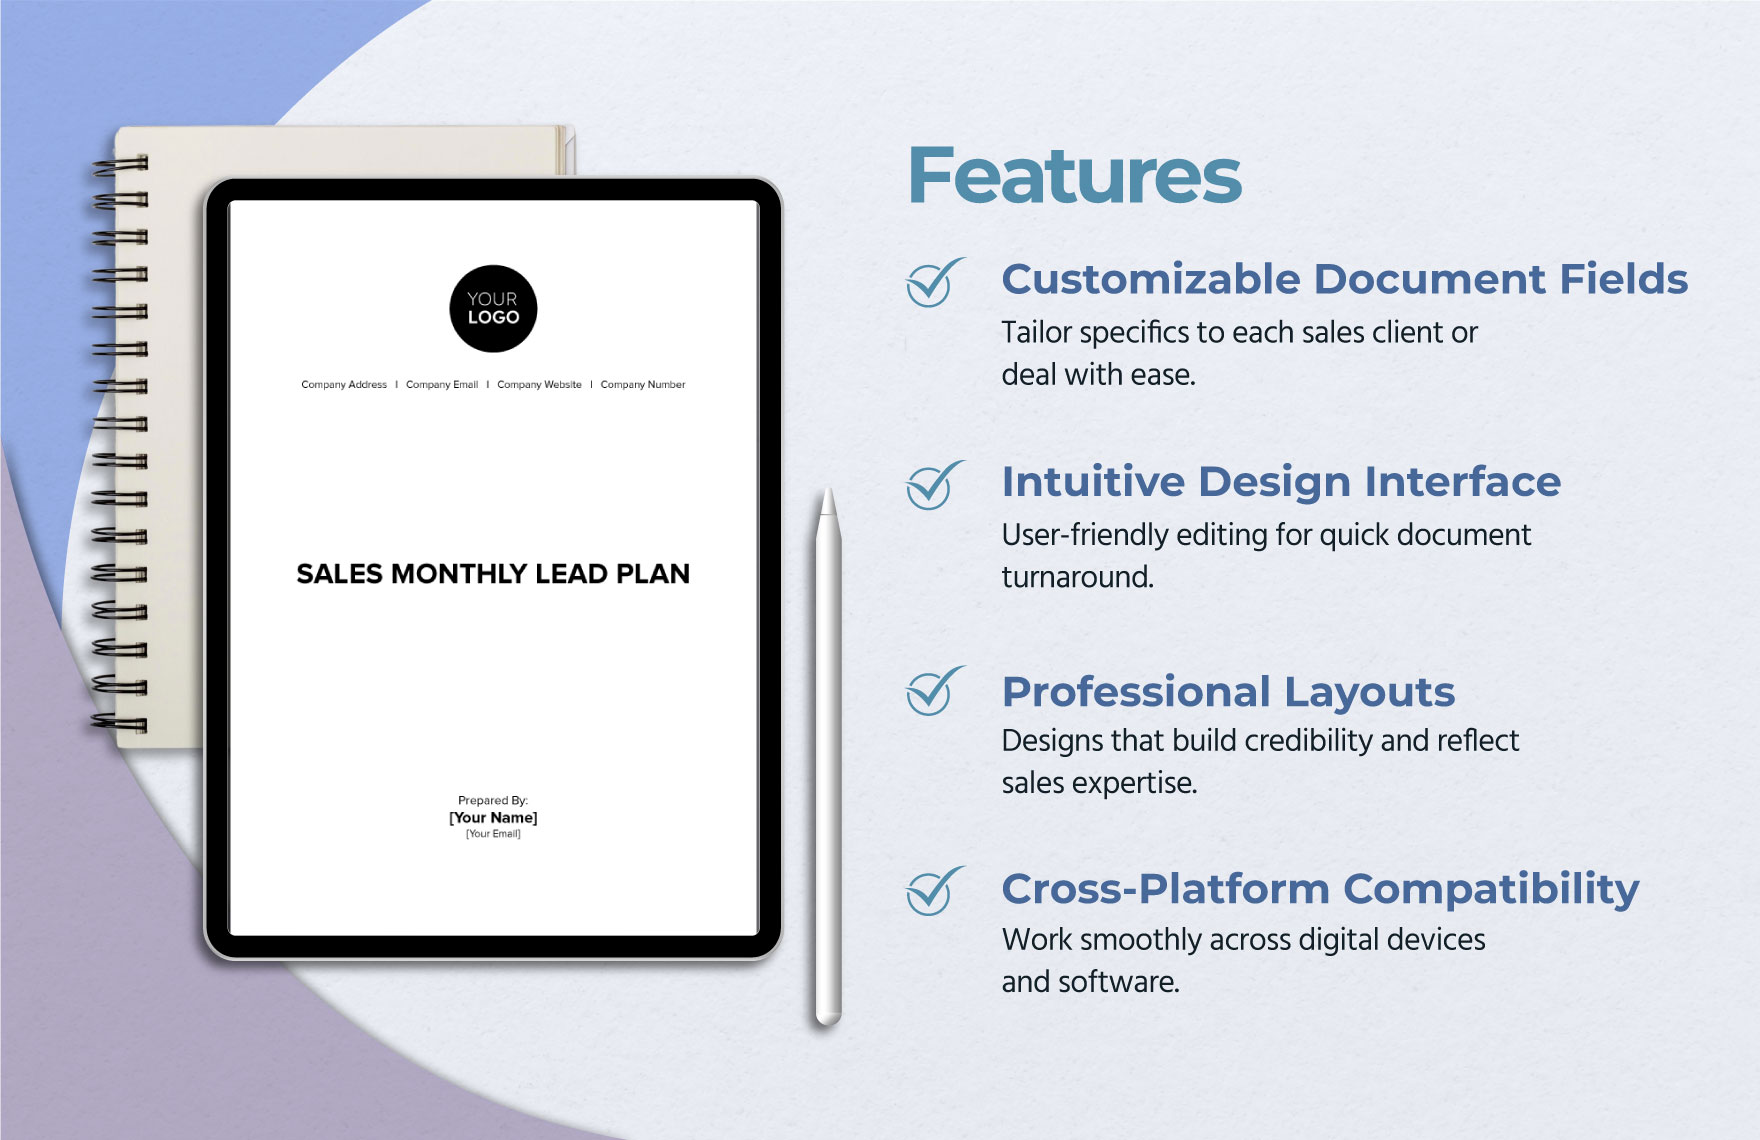 Sales Monthly Lead Plan Template